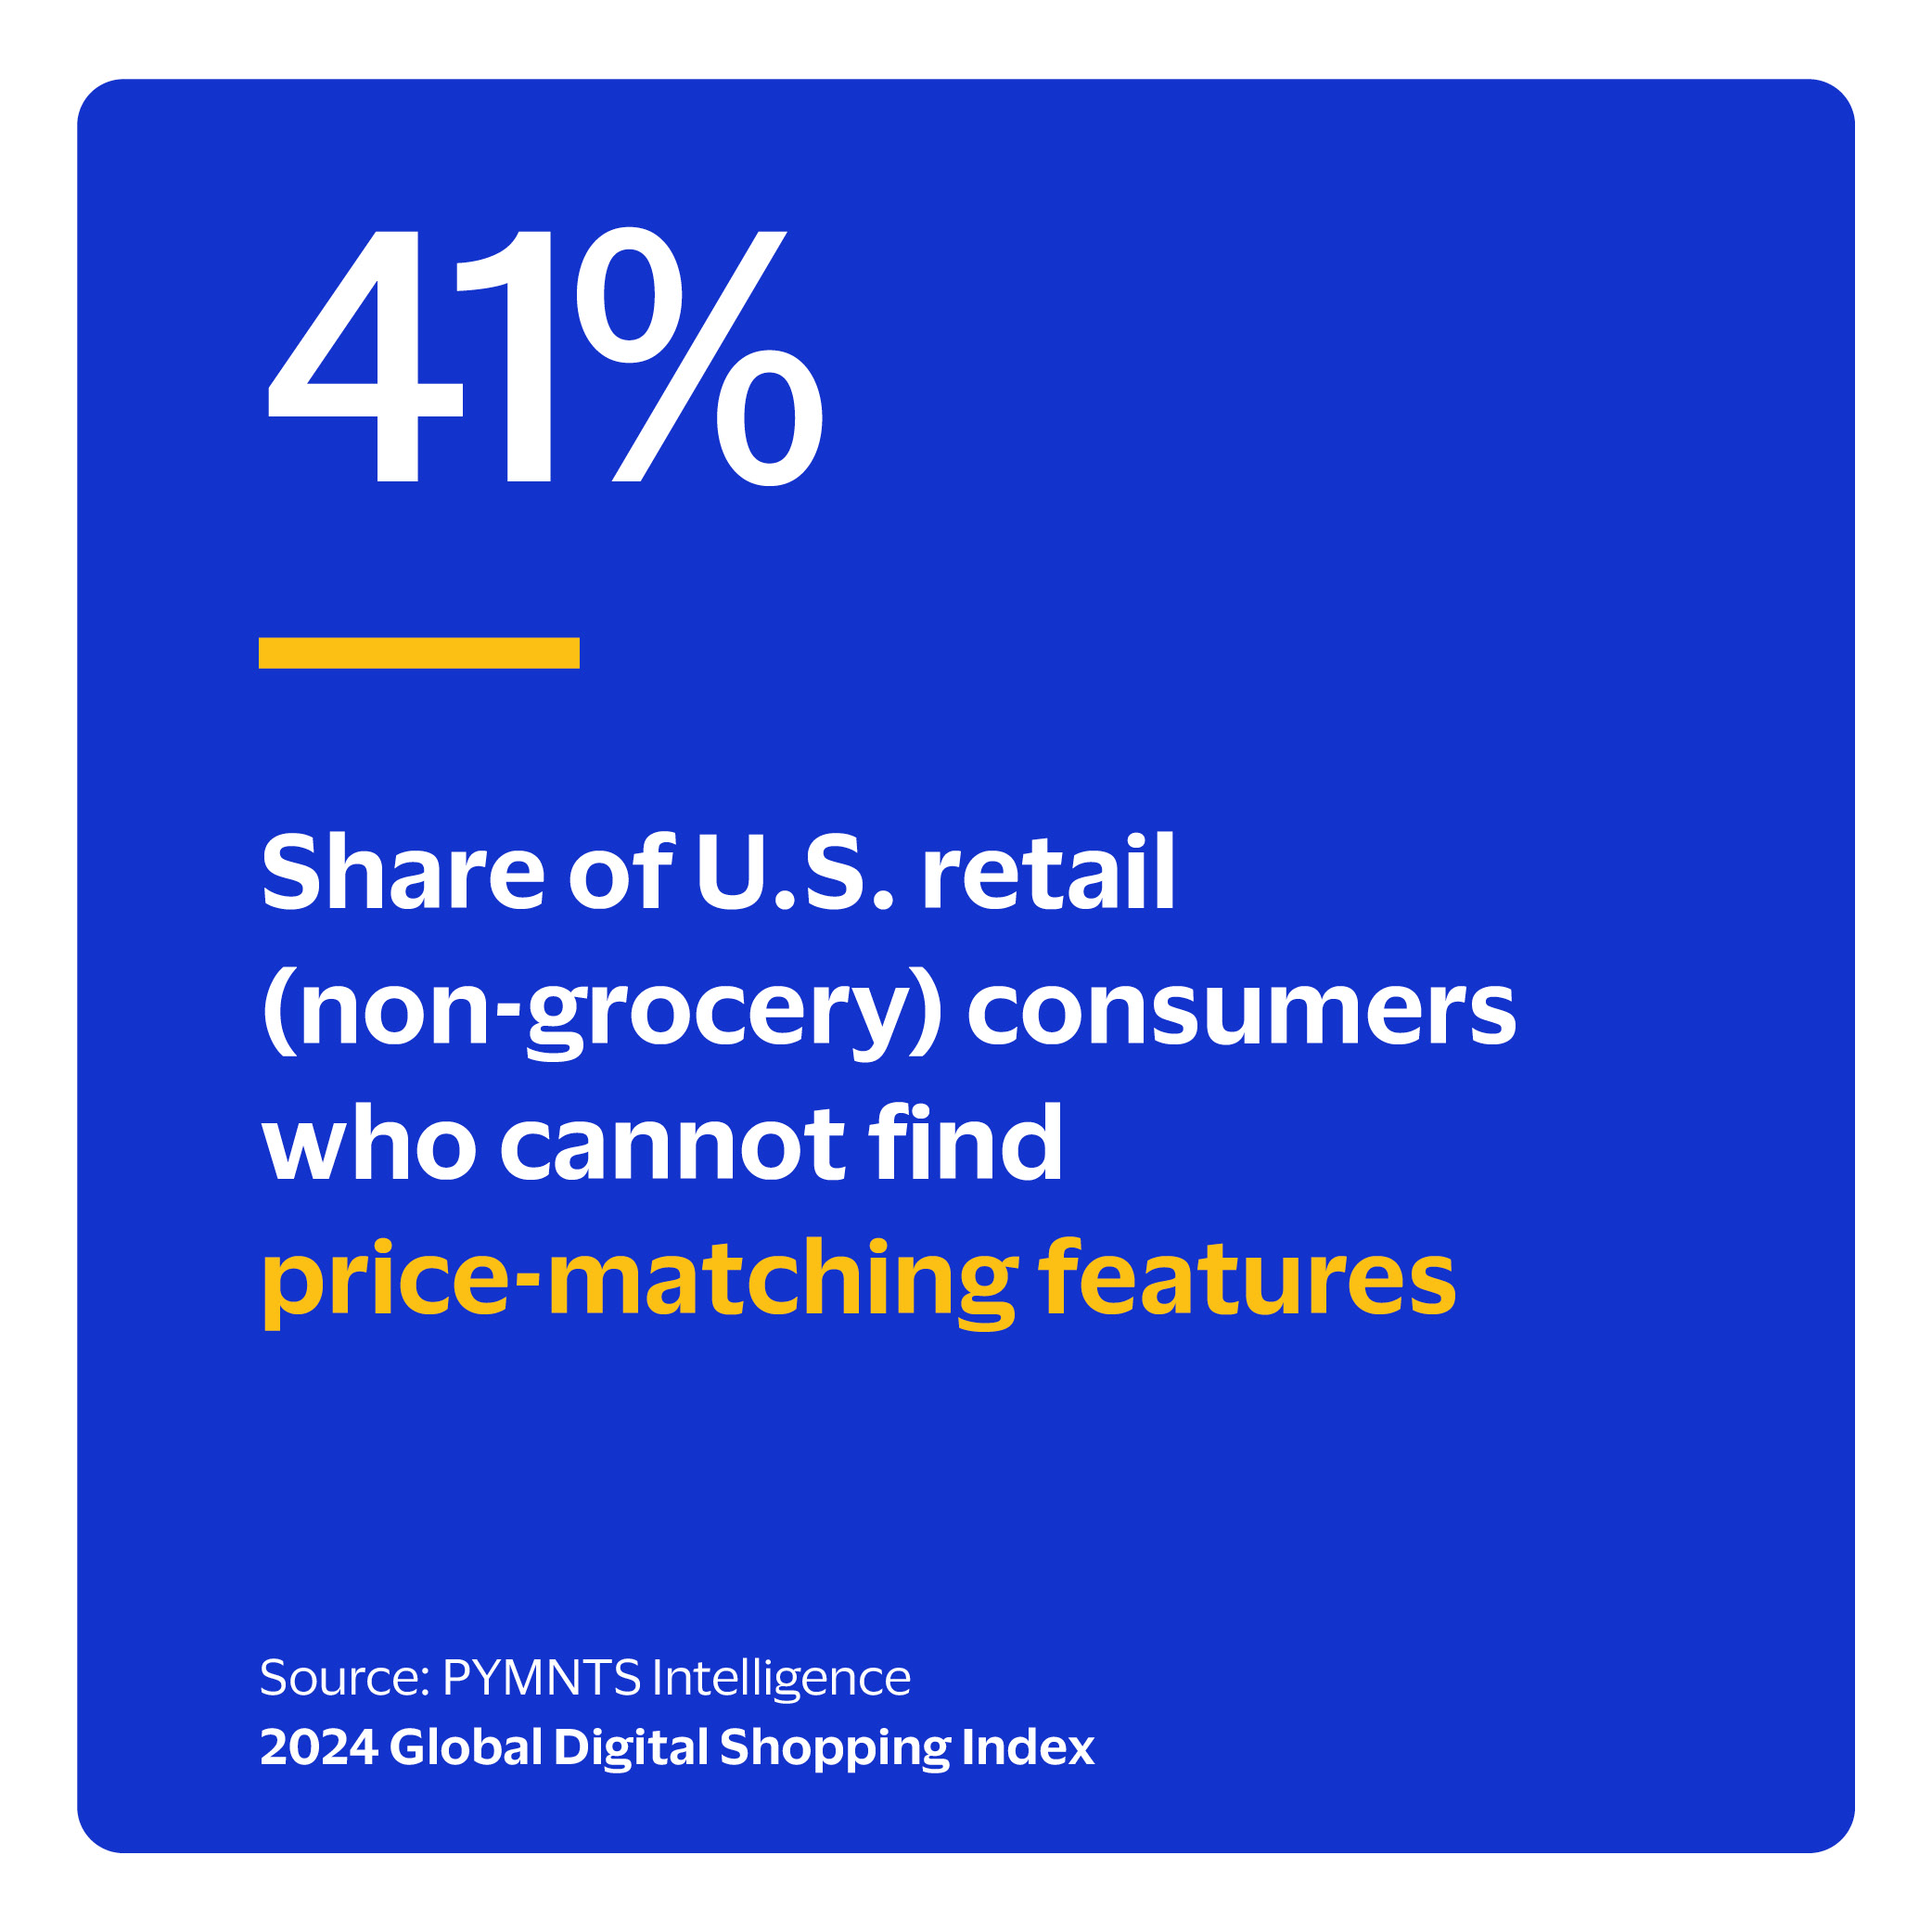  Share of U.S. retail (non-grocery) consumers who cannot find price-matching features